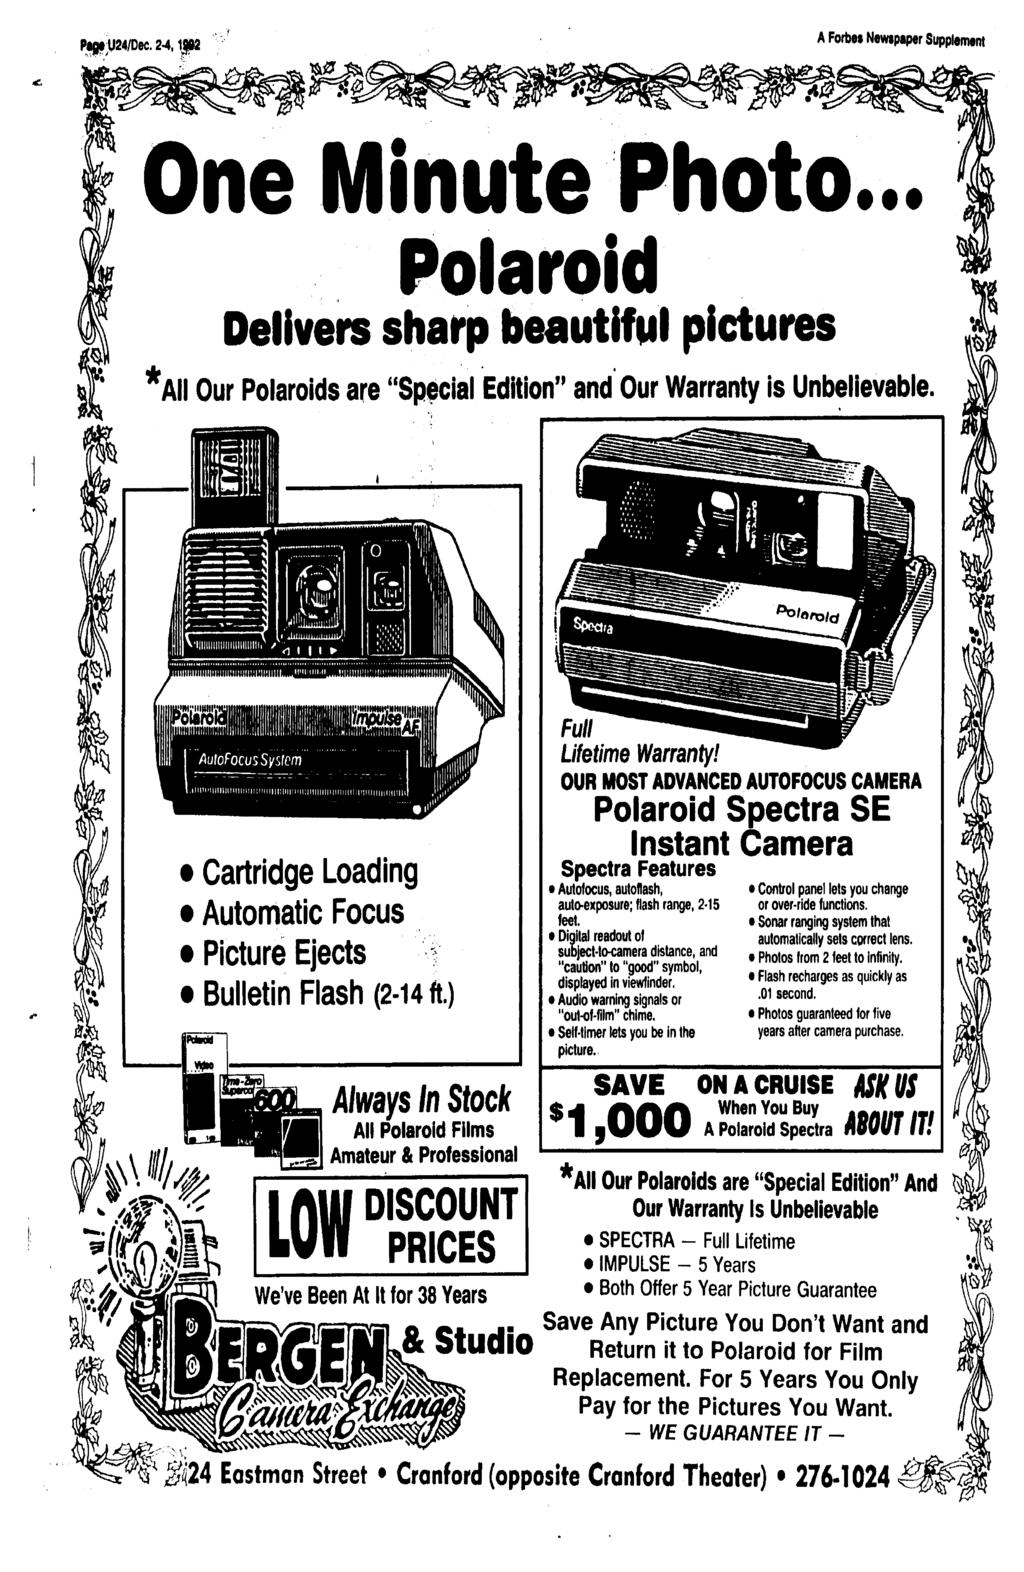 Ptpt;U24/Dec. 2-4 3-7 A Forbes Newspaper Supplement One Minute Photo... Polaroid Delivers sharp beautiful pictures *AII Our Polaroids are "Special Edition" and Our Warranty is Unbelievable.